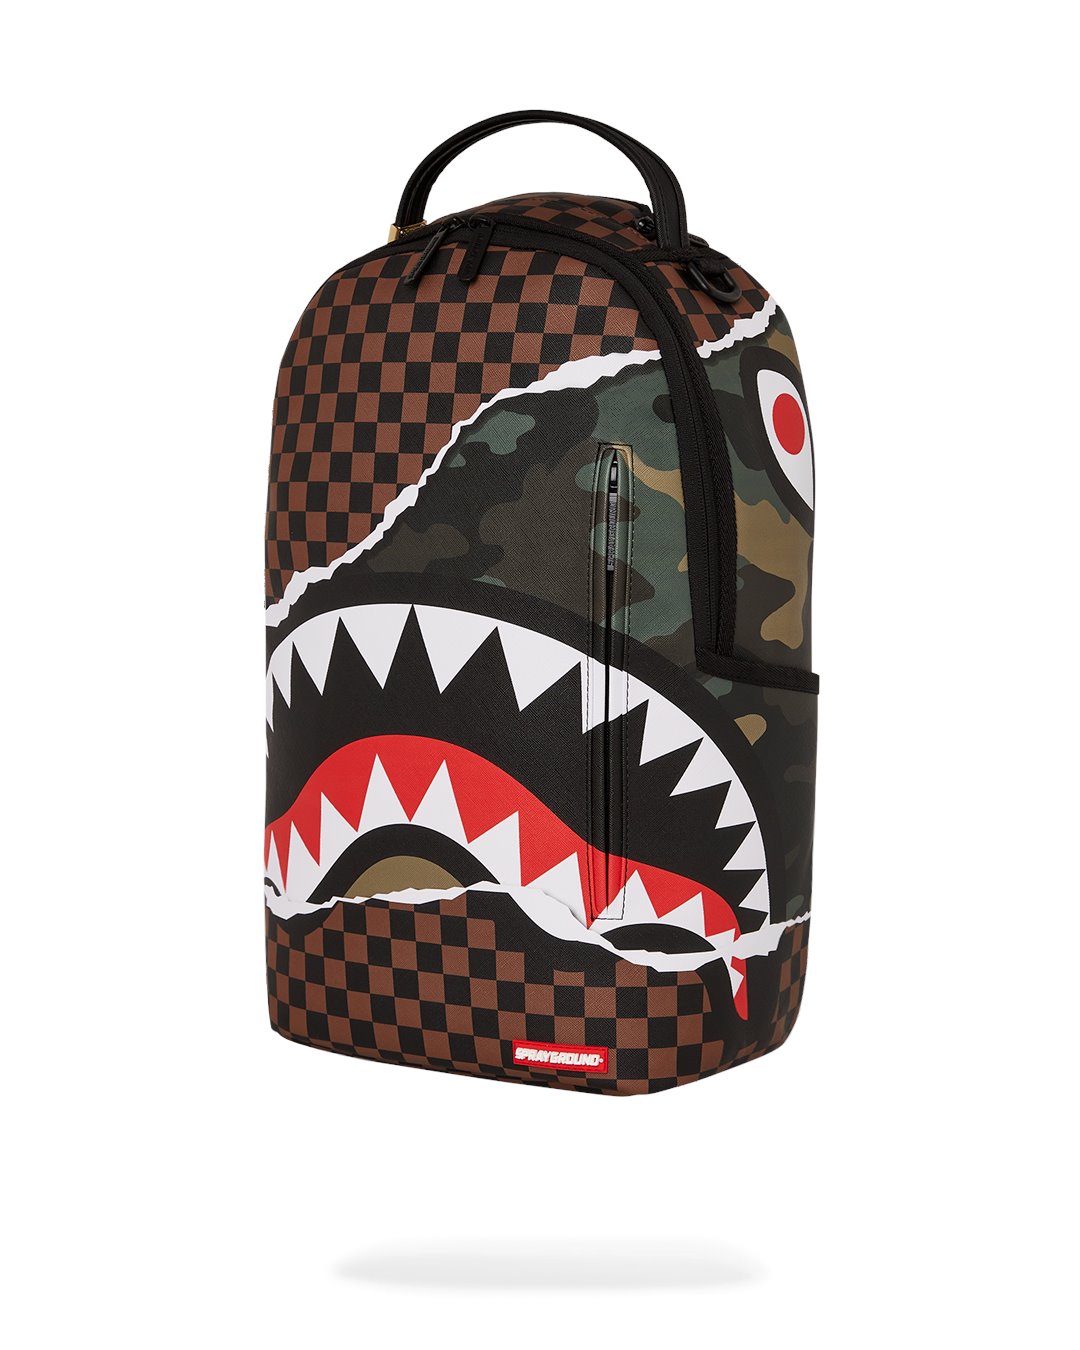 TEAR IT UP CHECK CAMO BACKPACK